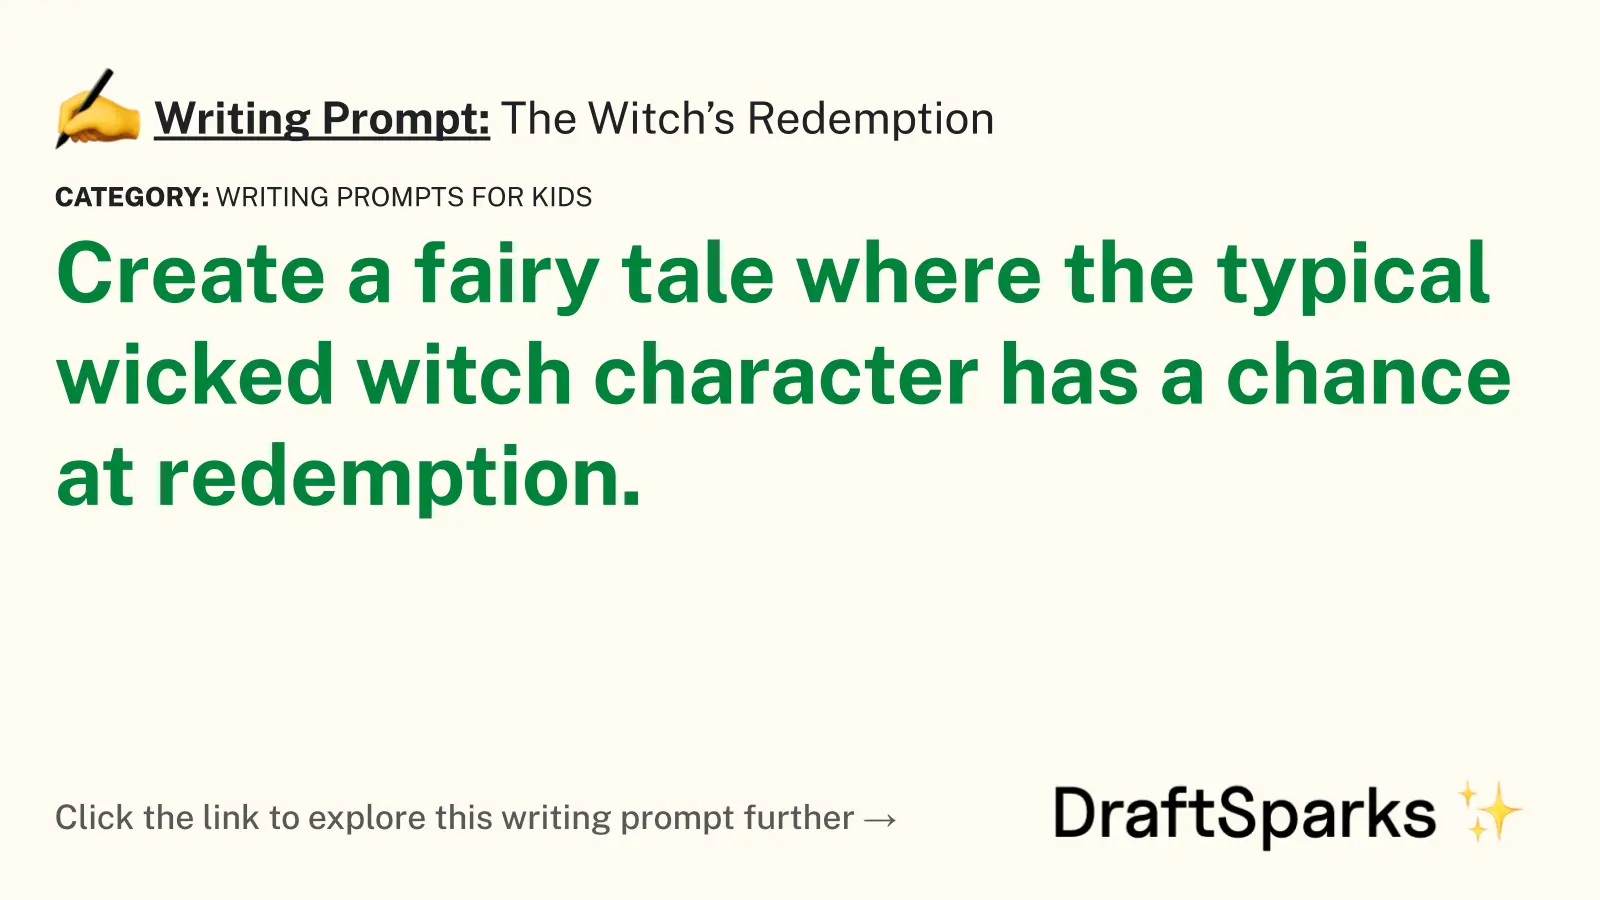 The Witch’s Redemption